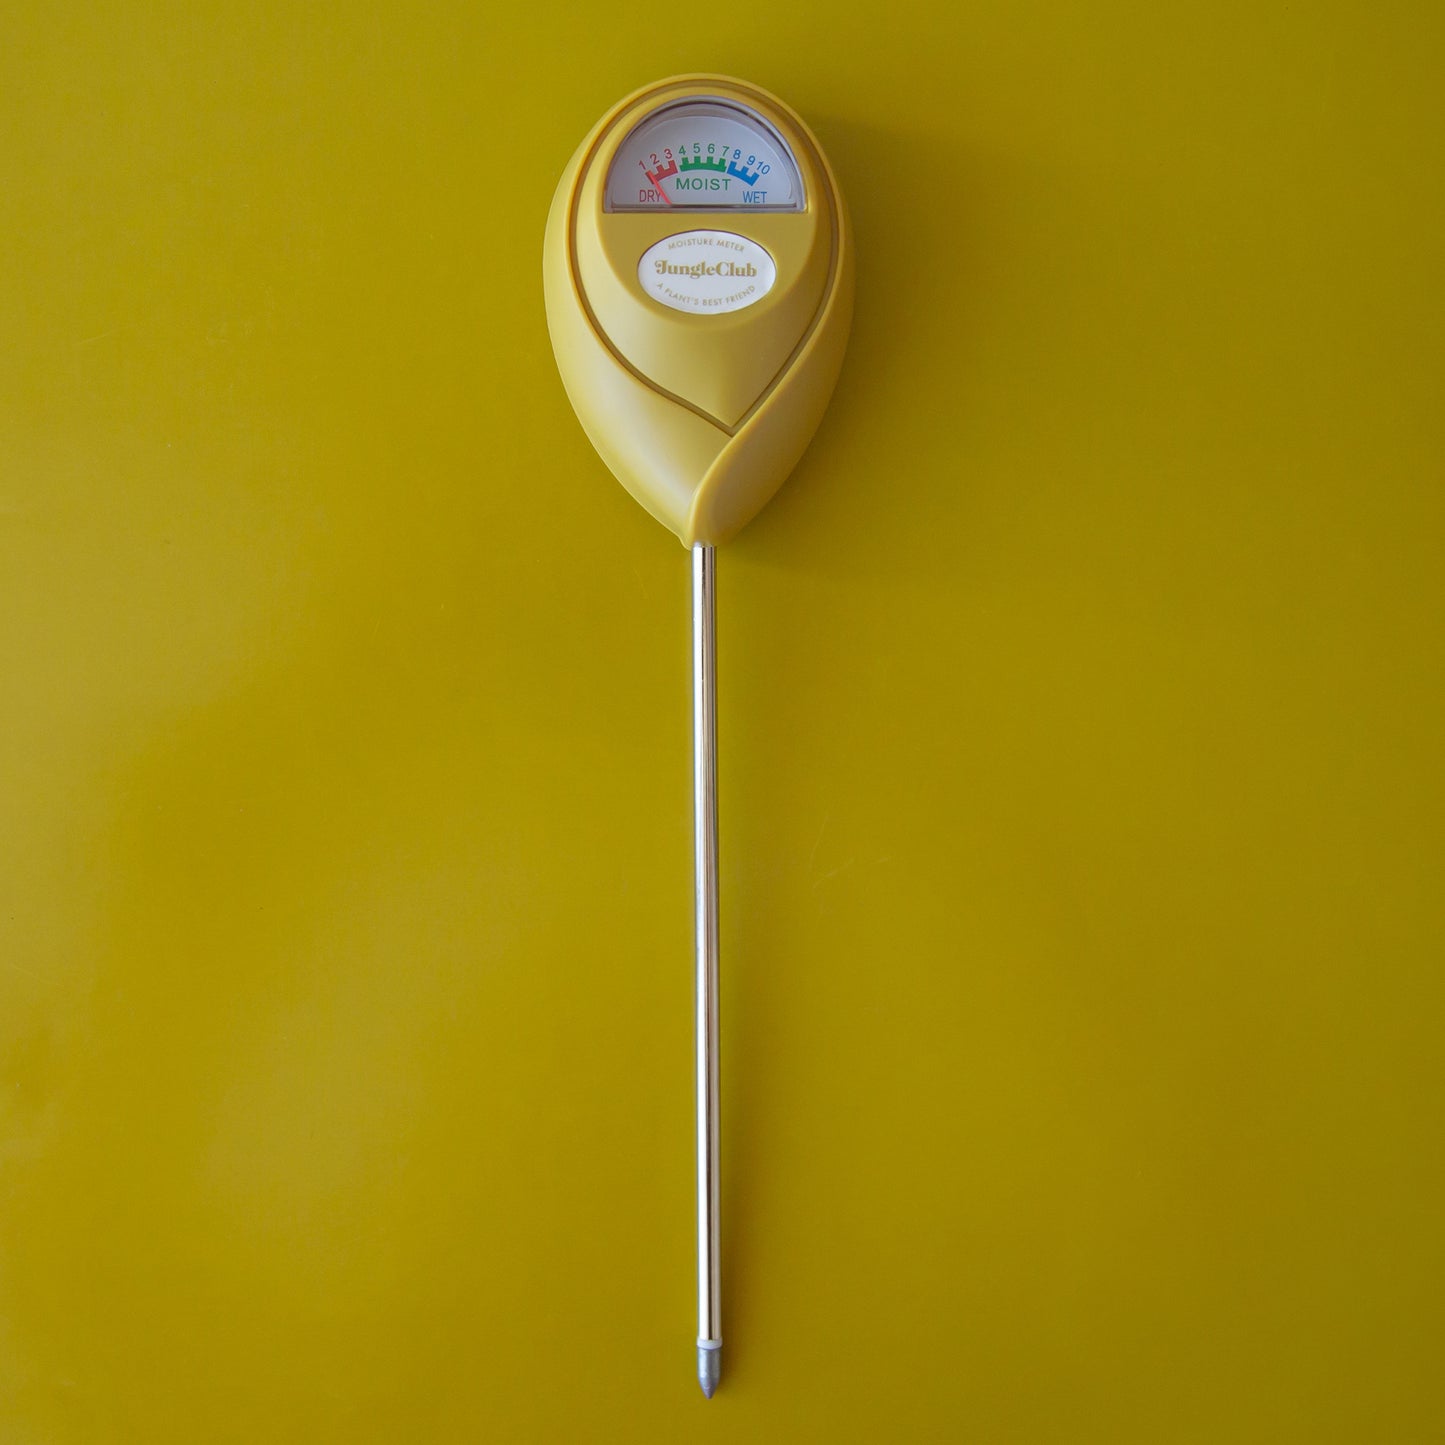 A chartreuse moisture meter with a rounded head and a white meter that ranges from dry, moist, or wet along with a small oval label in the front that reads, "Jungle Club".